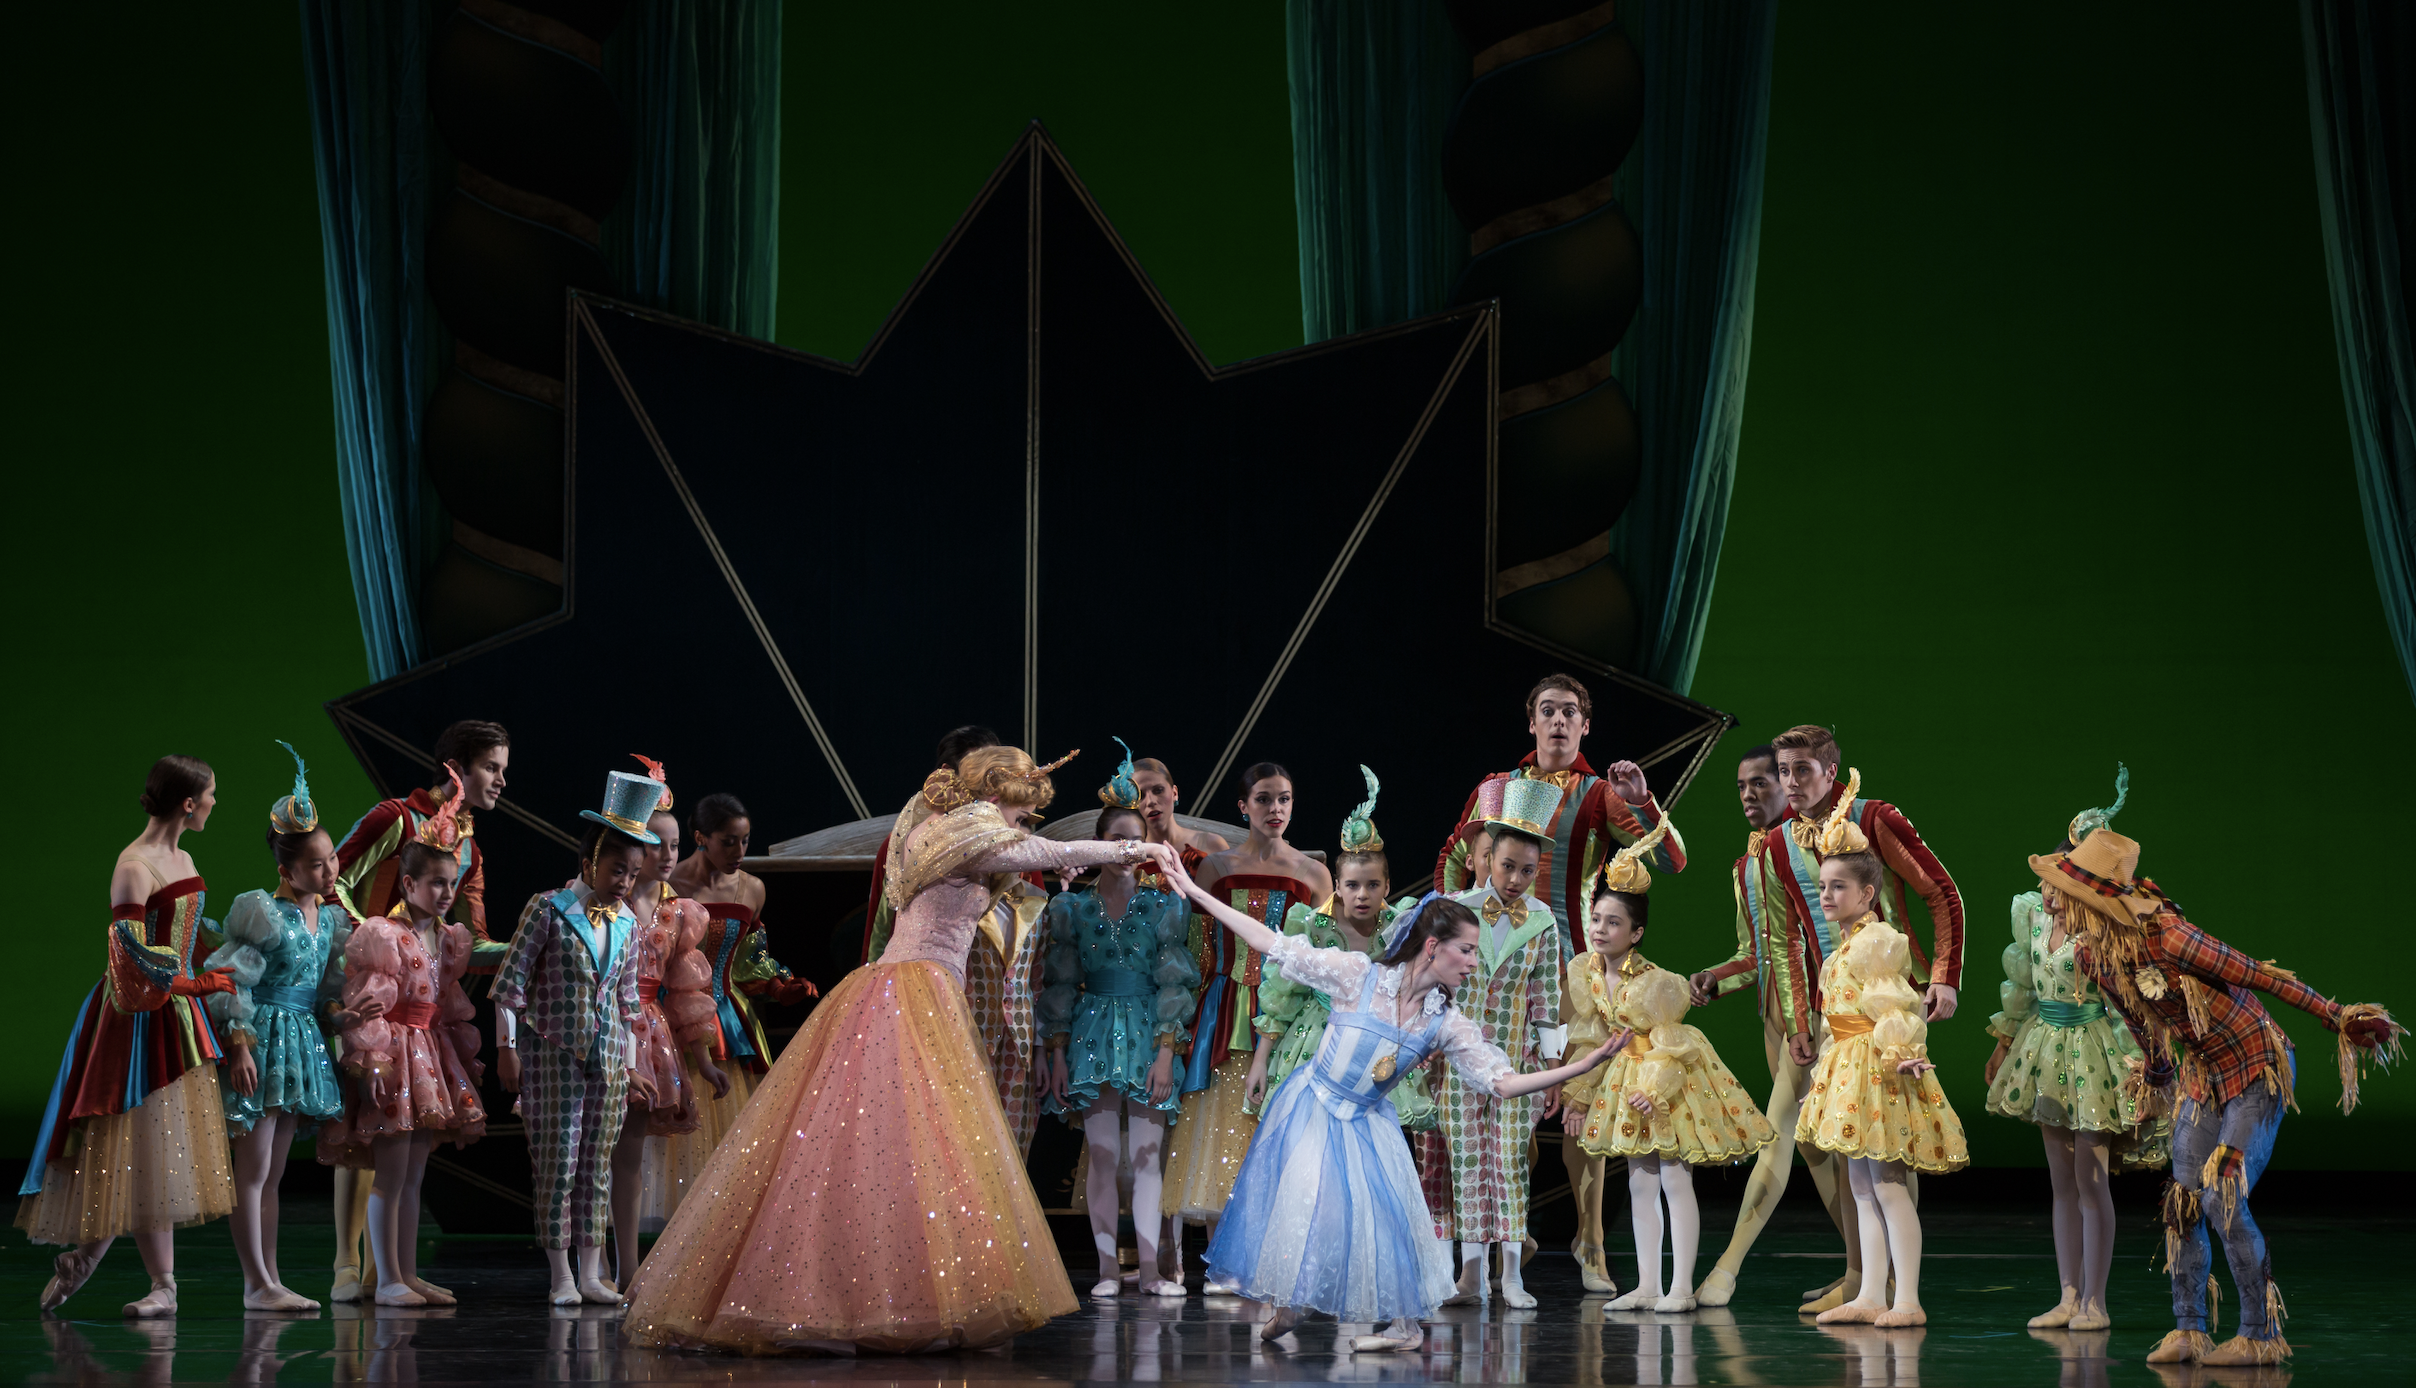 BalletMet is bringing back Dorothy and the Prince of Oz for the Second Time